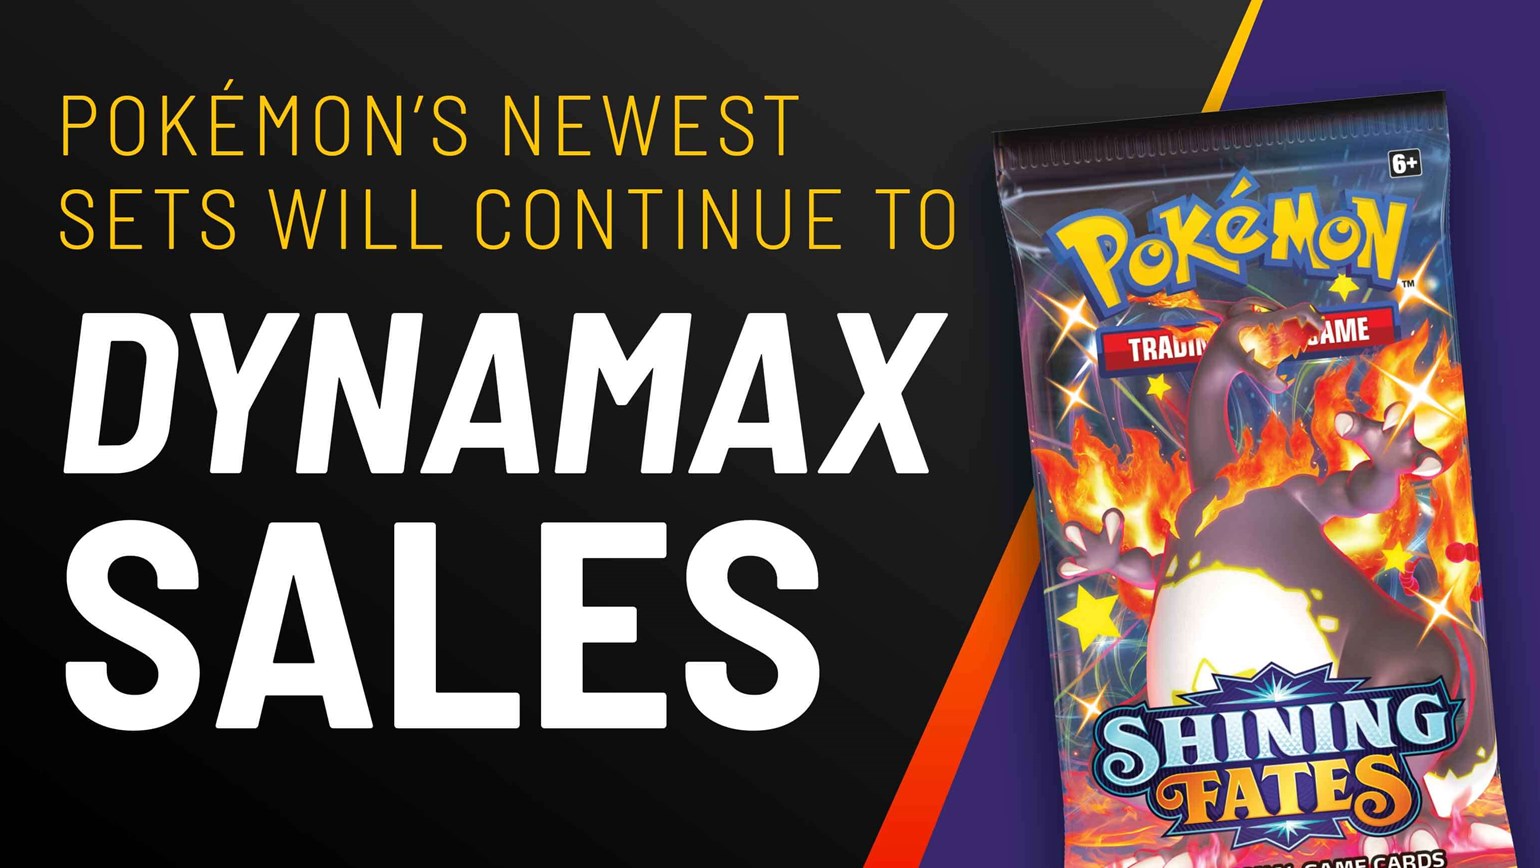 Pokémon’s Newest Sets Will Continue To Dynamax Sales